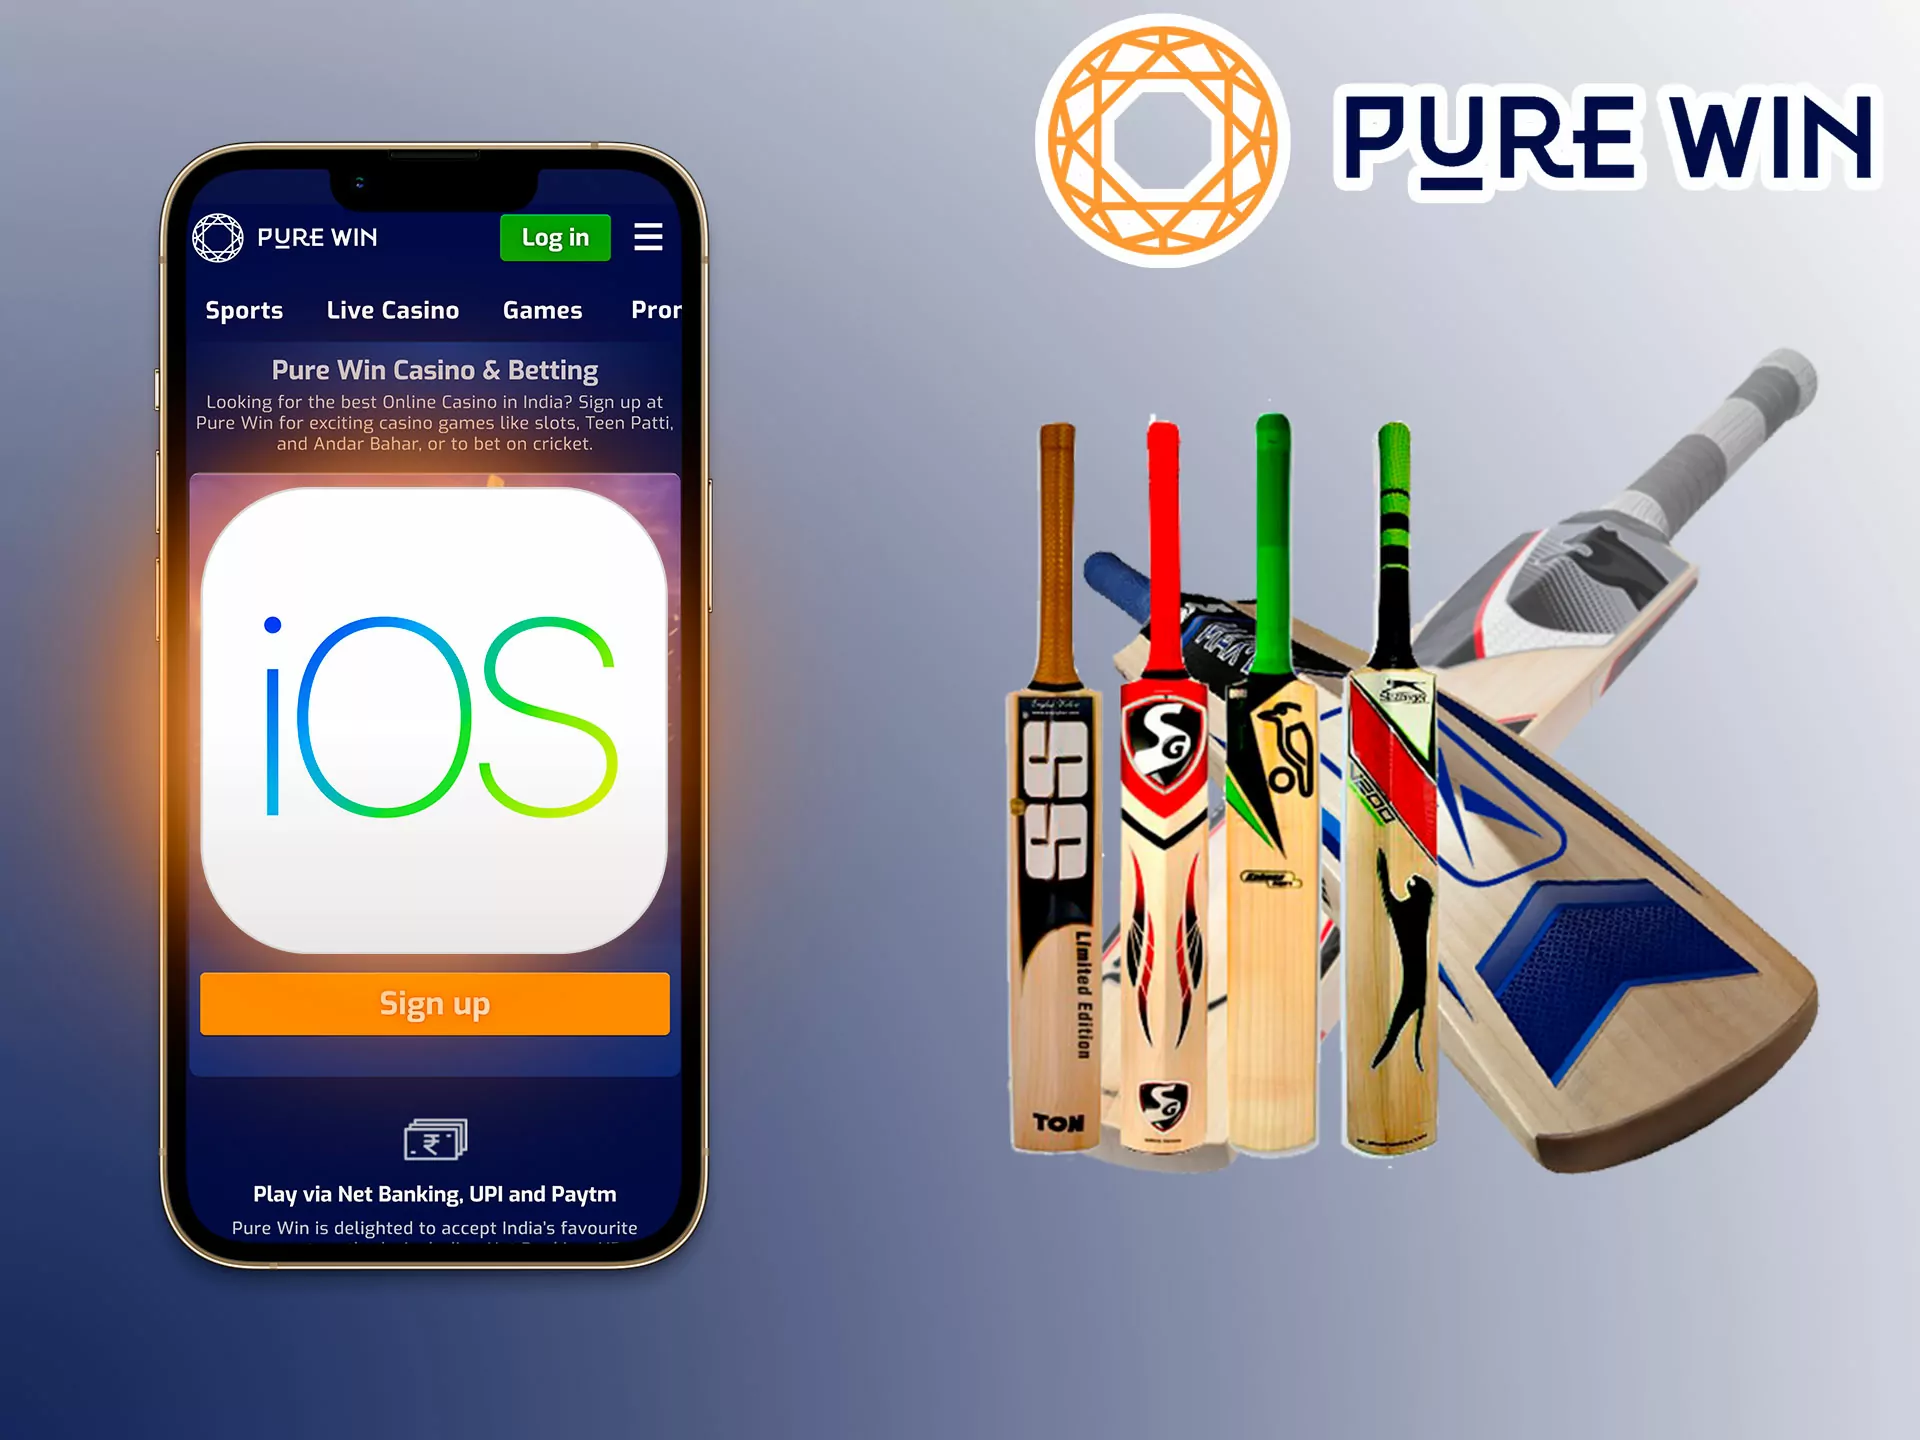 The App Store allows you to get the official Pure Win app without restrictions.